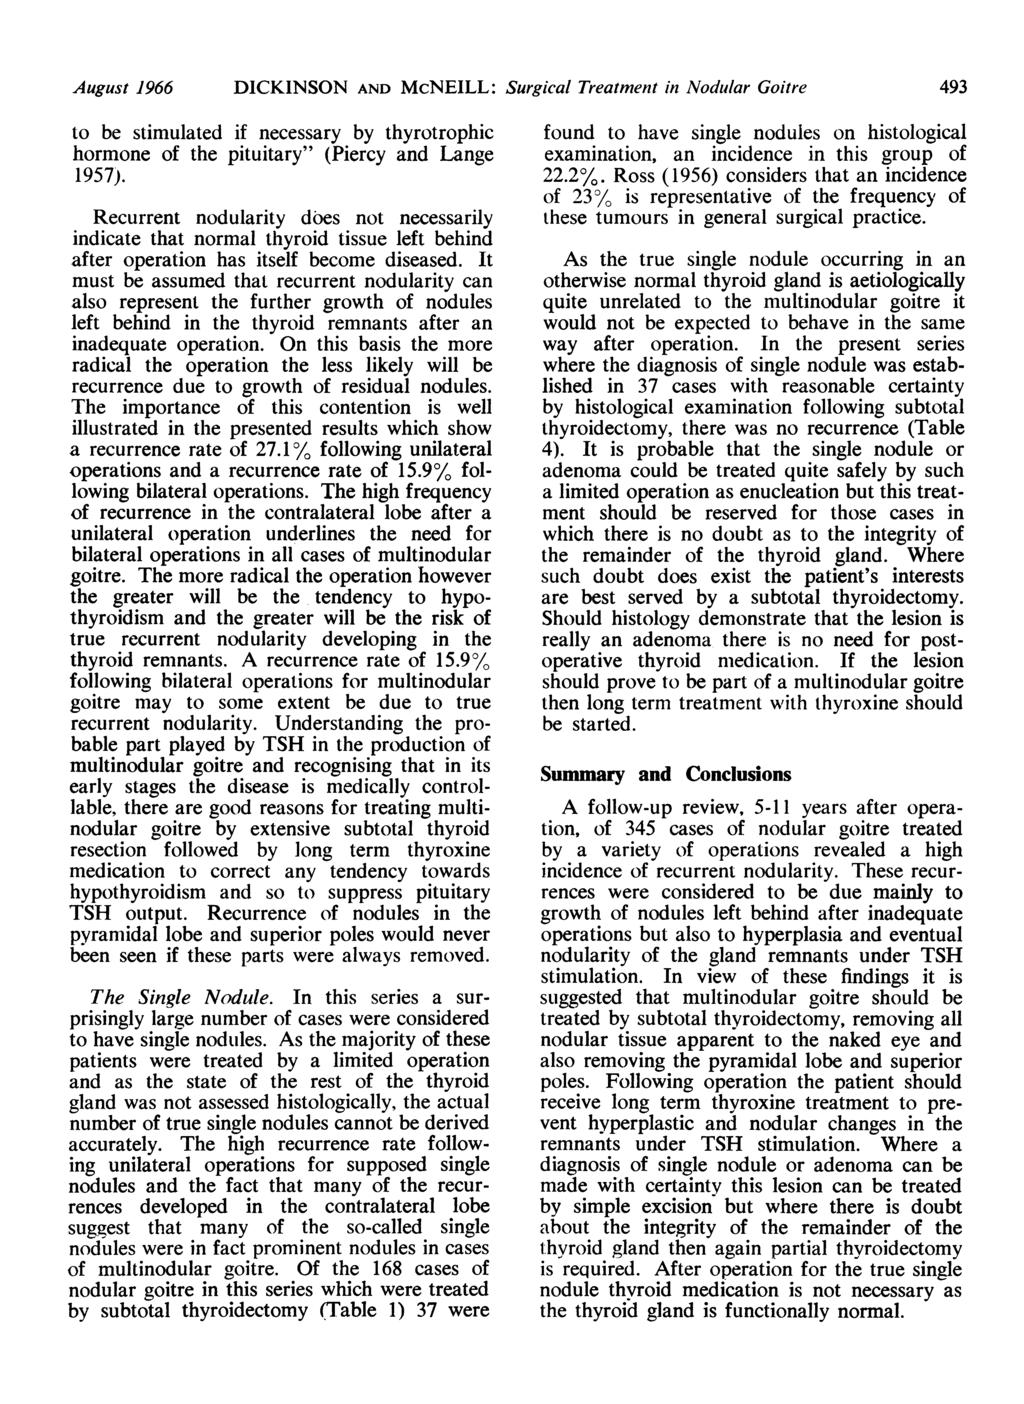 August 1966 DICKINSON AND McNEILL: Surgical Treatment in Nodular Goitre 493 to be stimulated if necessary by thyrotrophic hormone of the pituitary" (Piercy and Lange 1957).